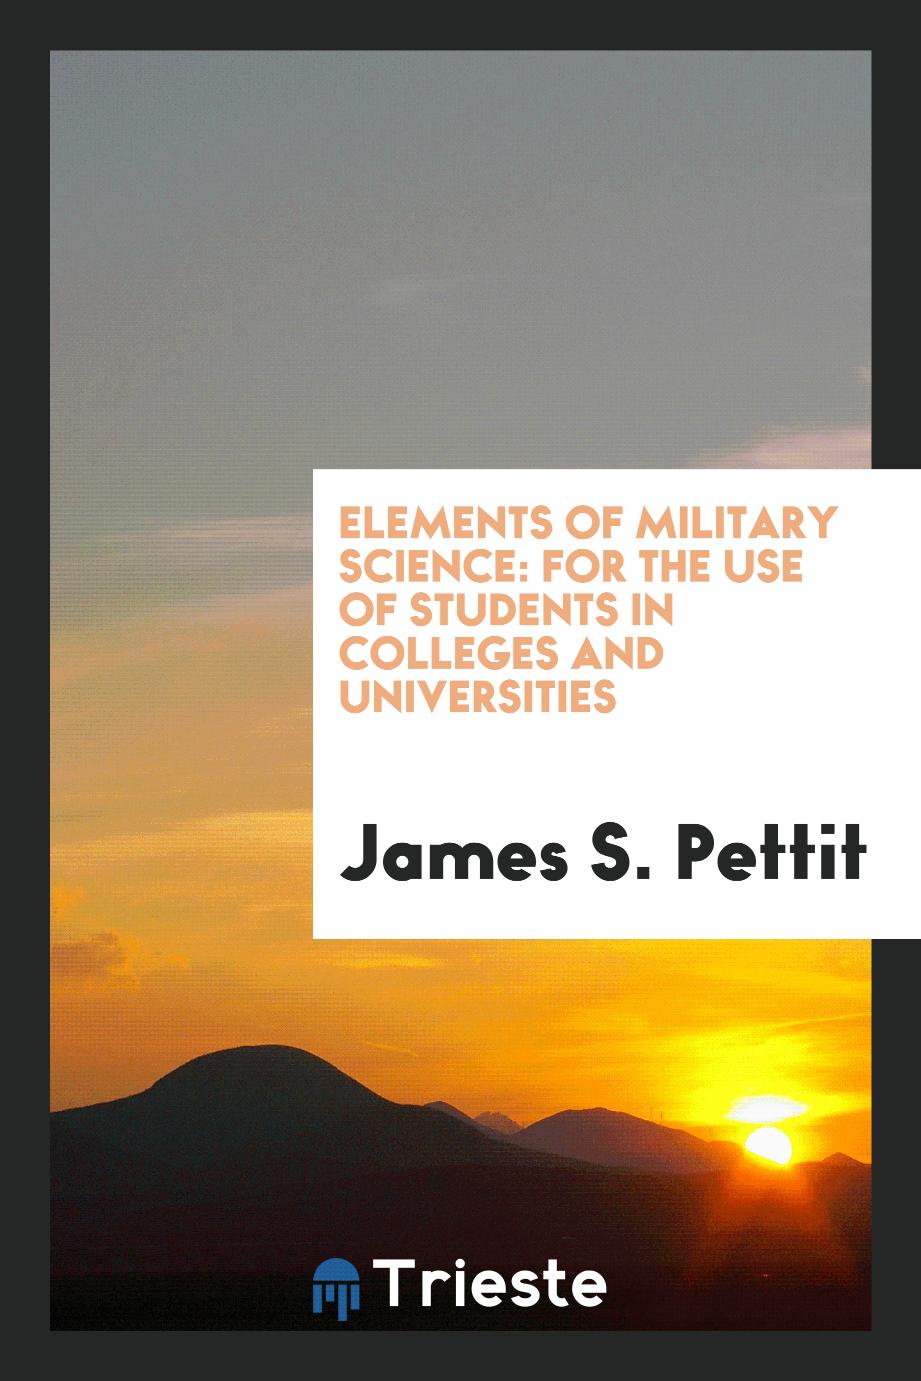 James S. Pettit - Elements of Military Science: For the Use of Students in Colleges and Universities